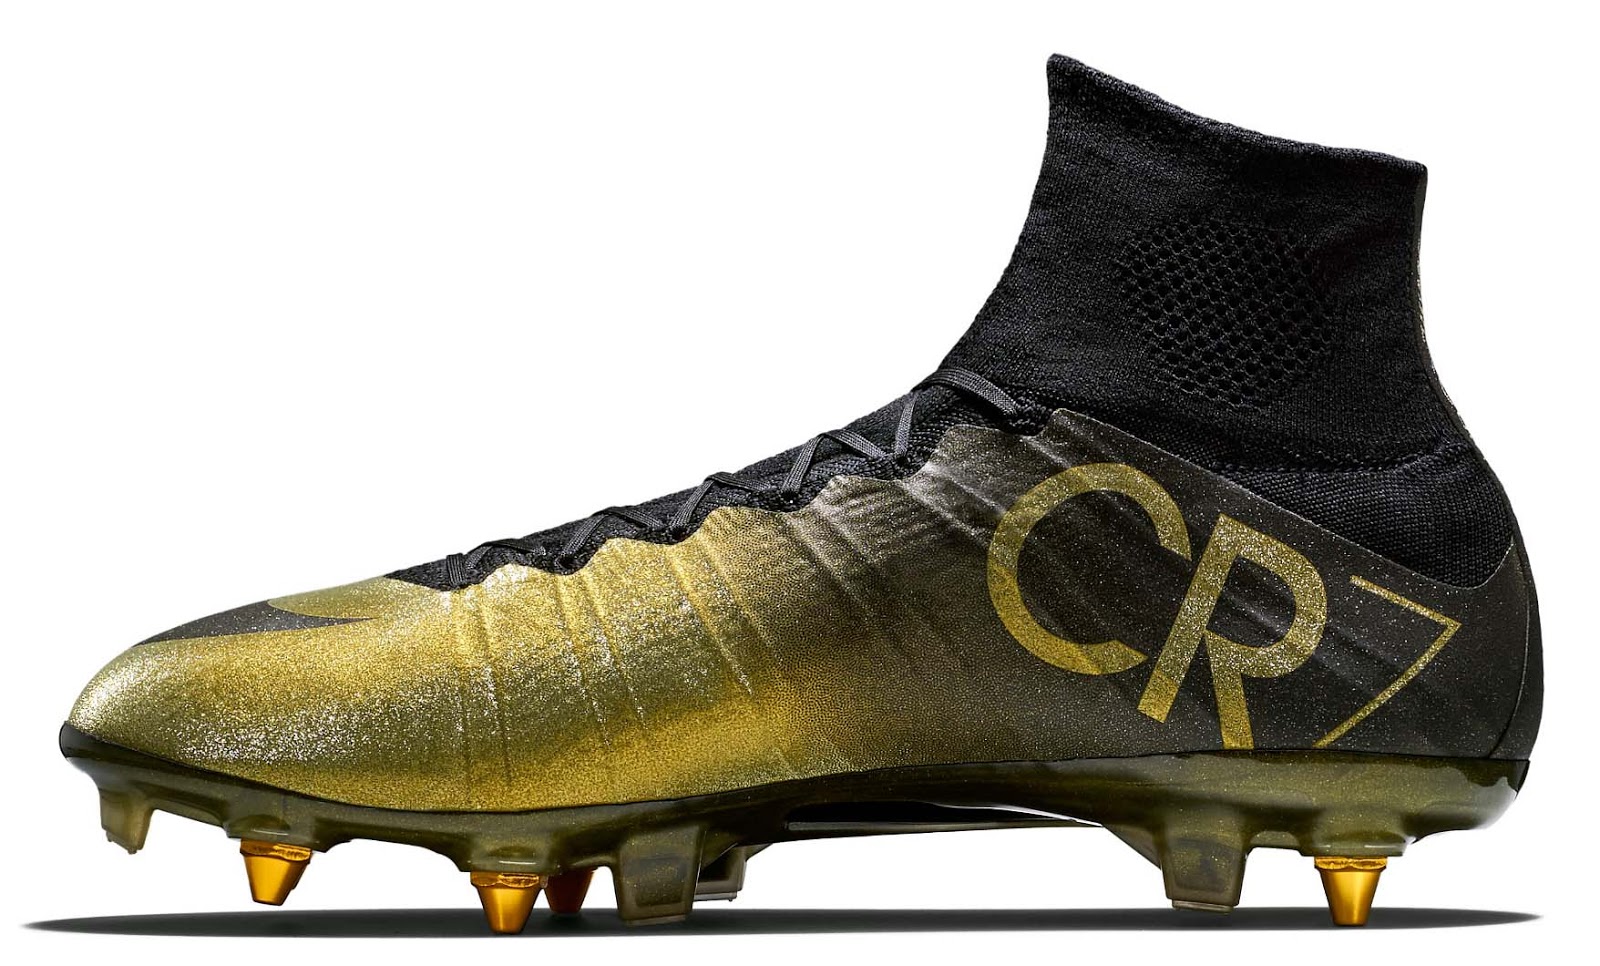  Nike  Mercurial Superfly CR7  Rare Gold Boots  Sold Out 